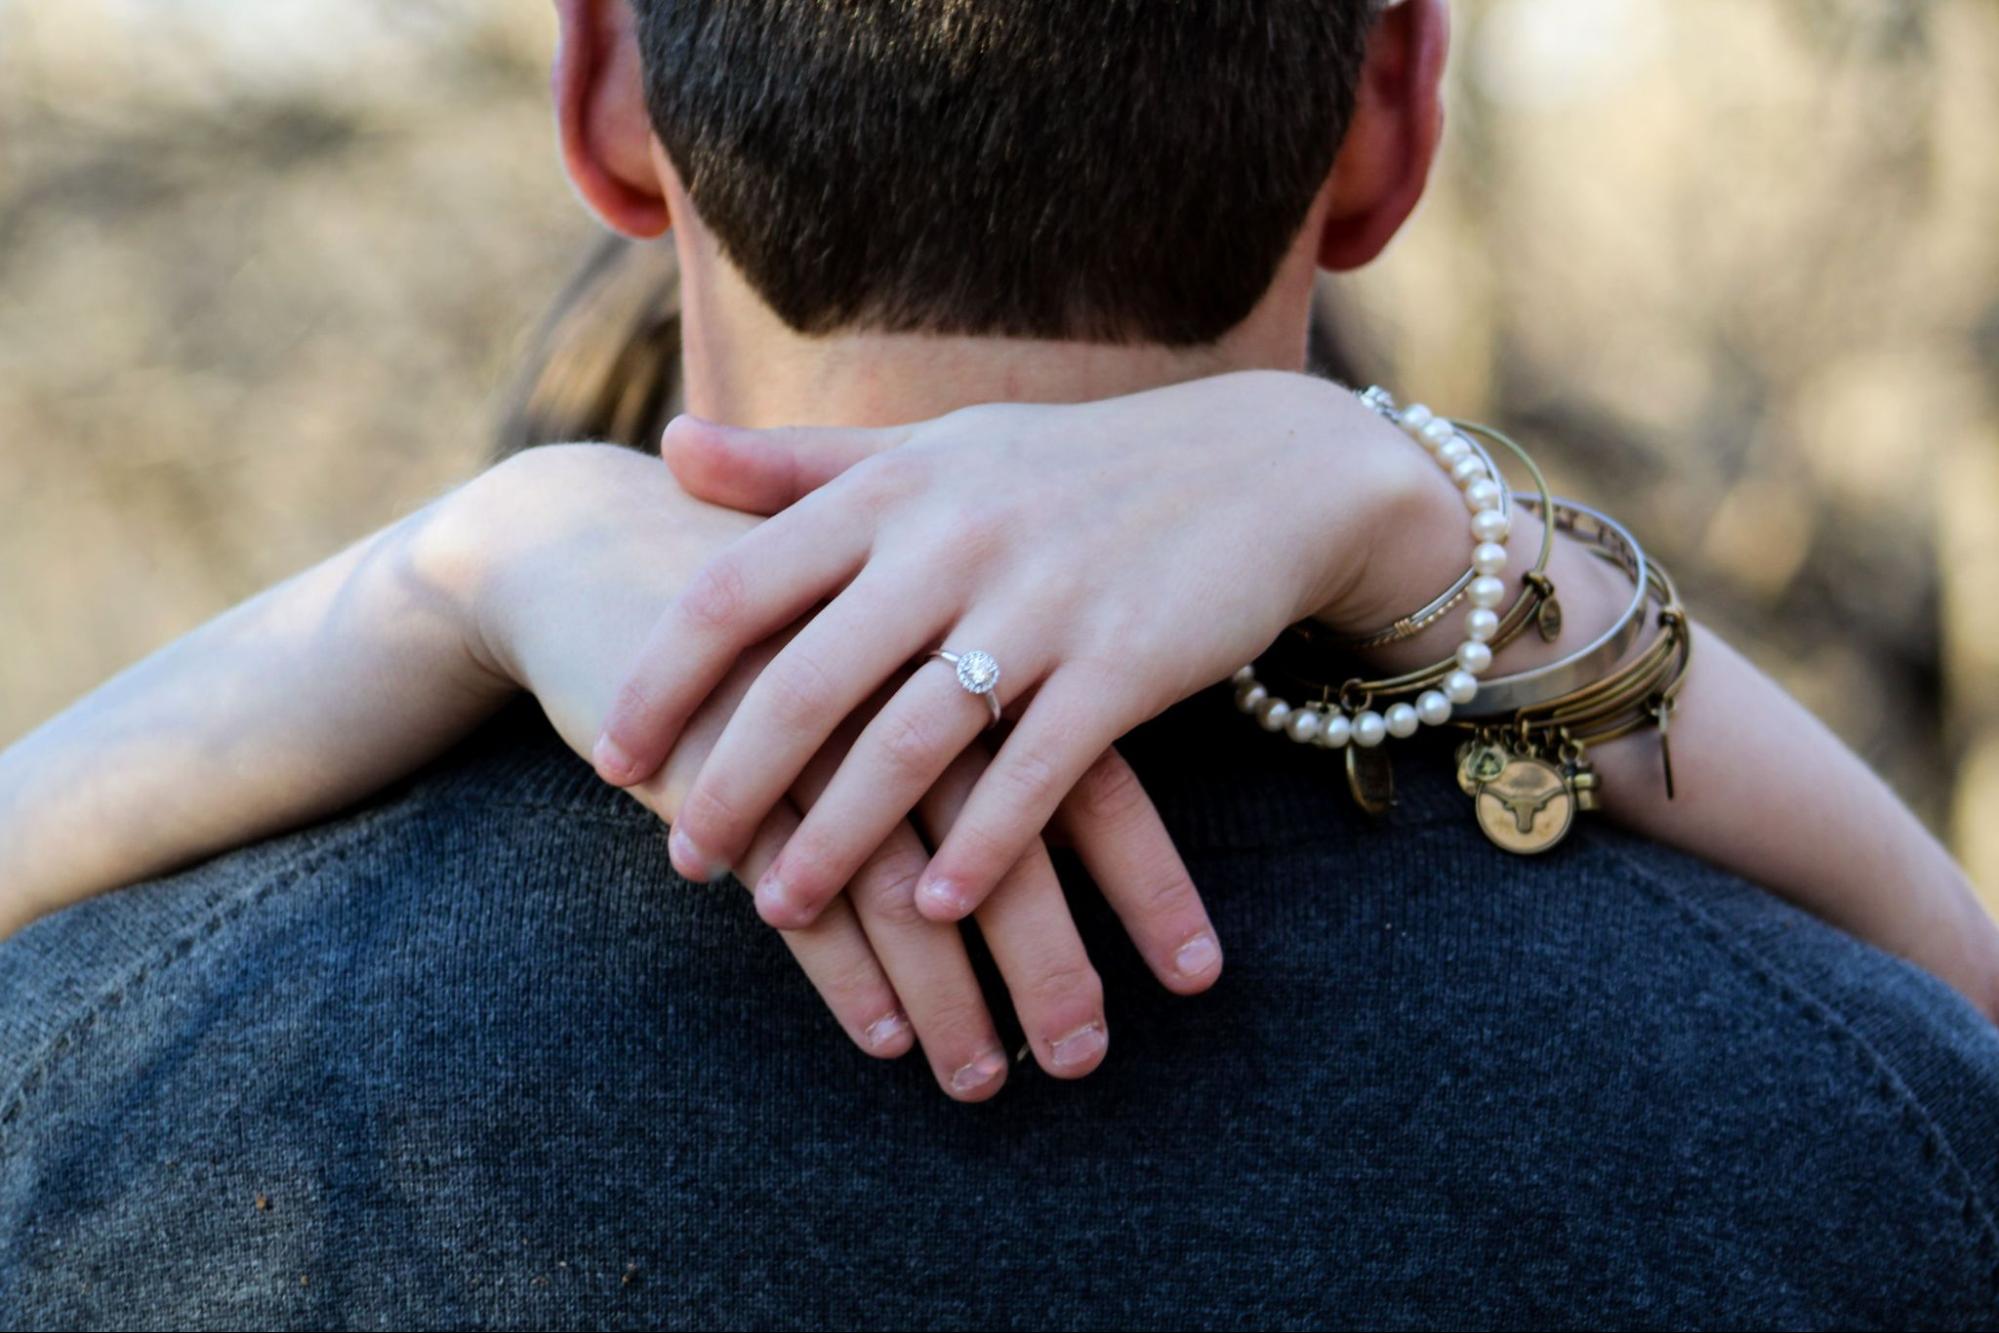 A woman embracing her fiance wears a pearl bracelet with stacks of bangles.